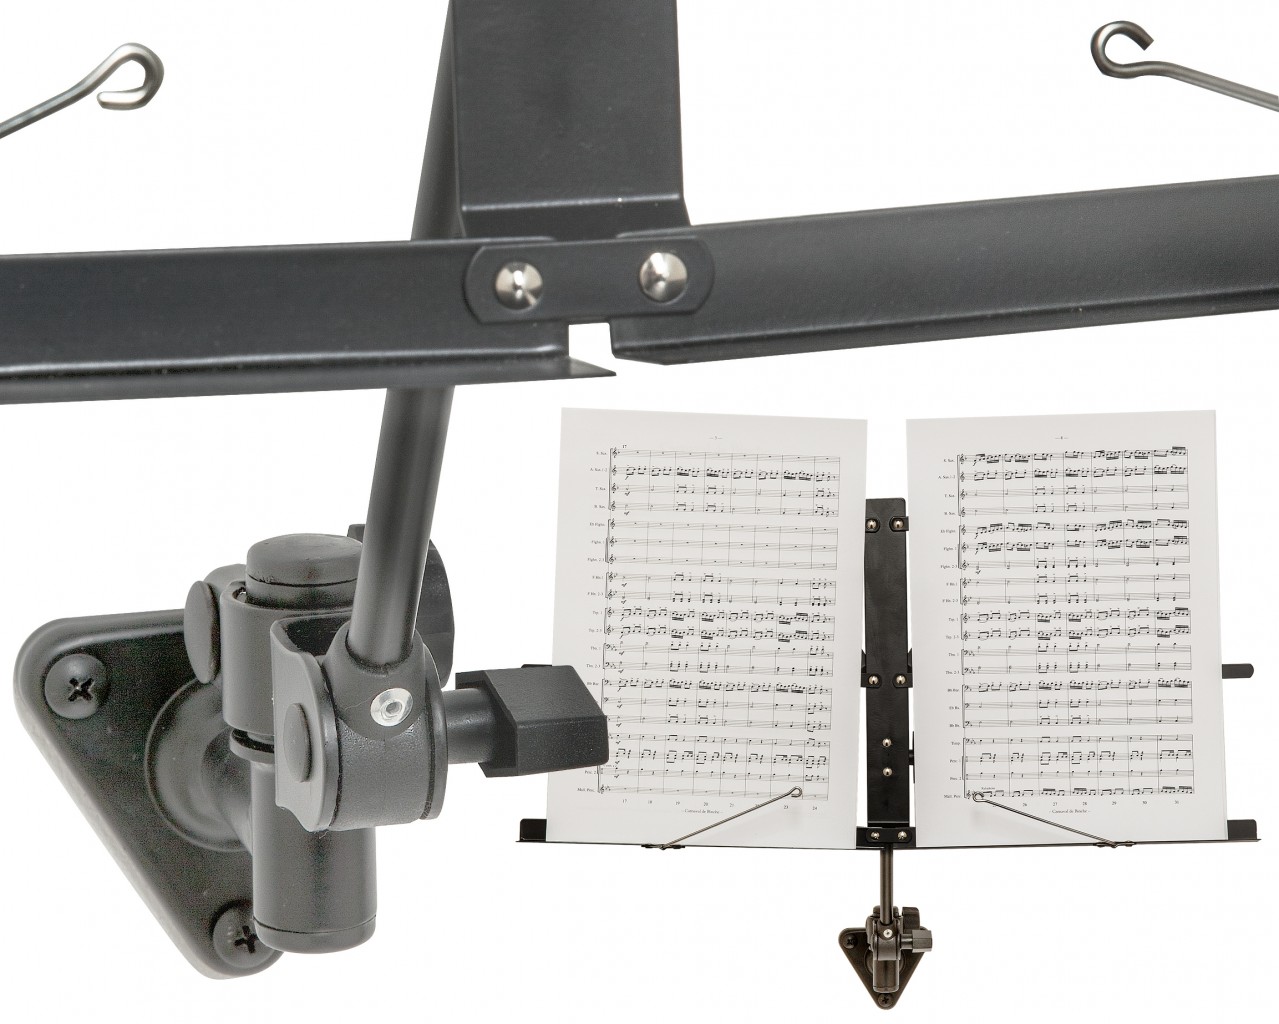 Wall-mounted music stand